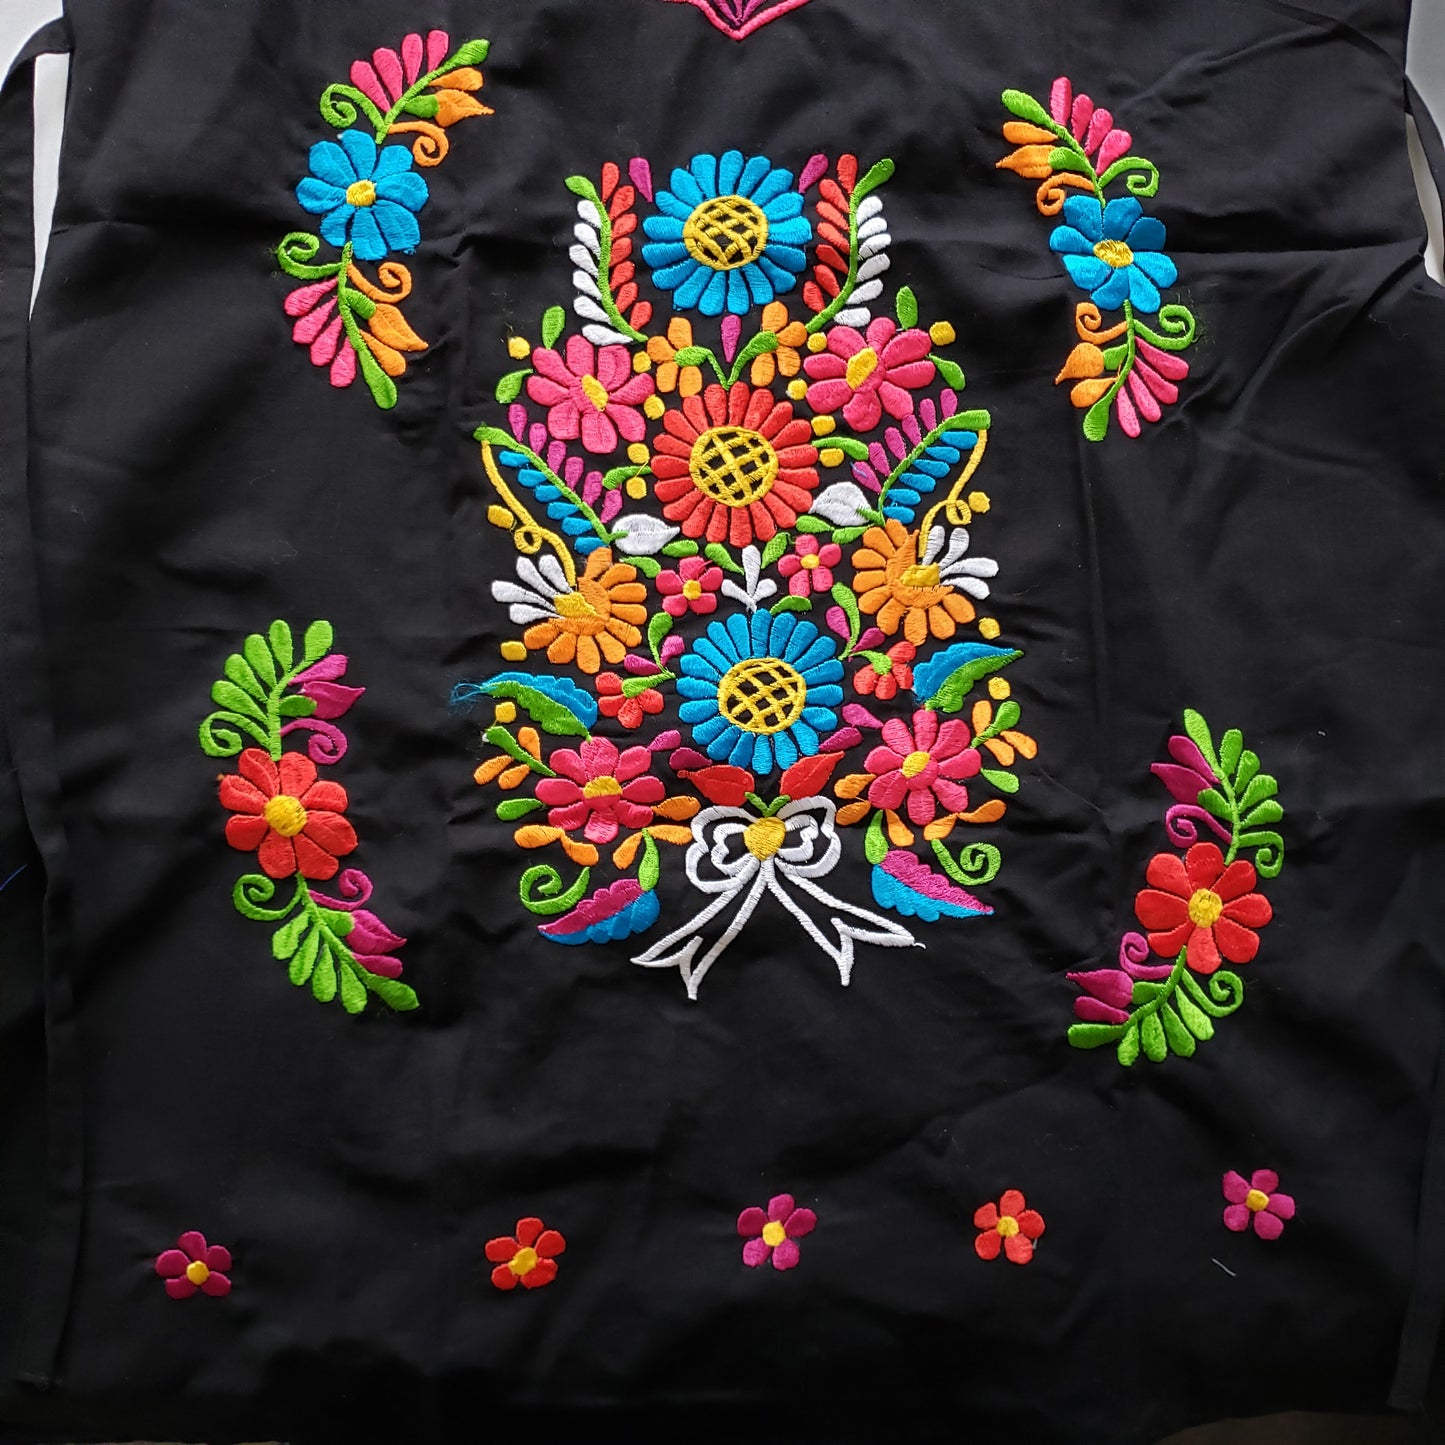 Colorful Hand Embroidered Floral Mexican Dress Size Large